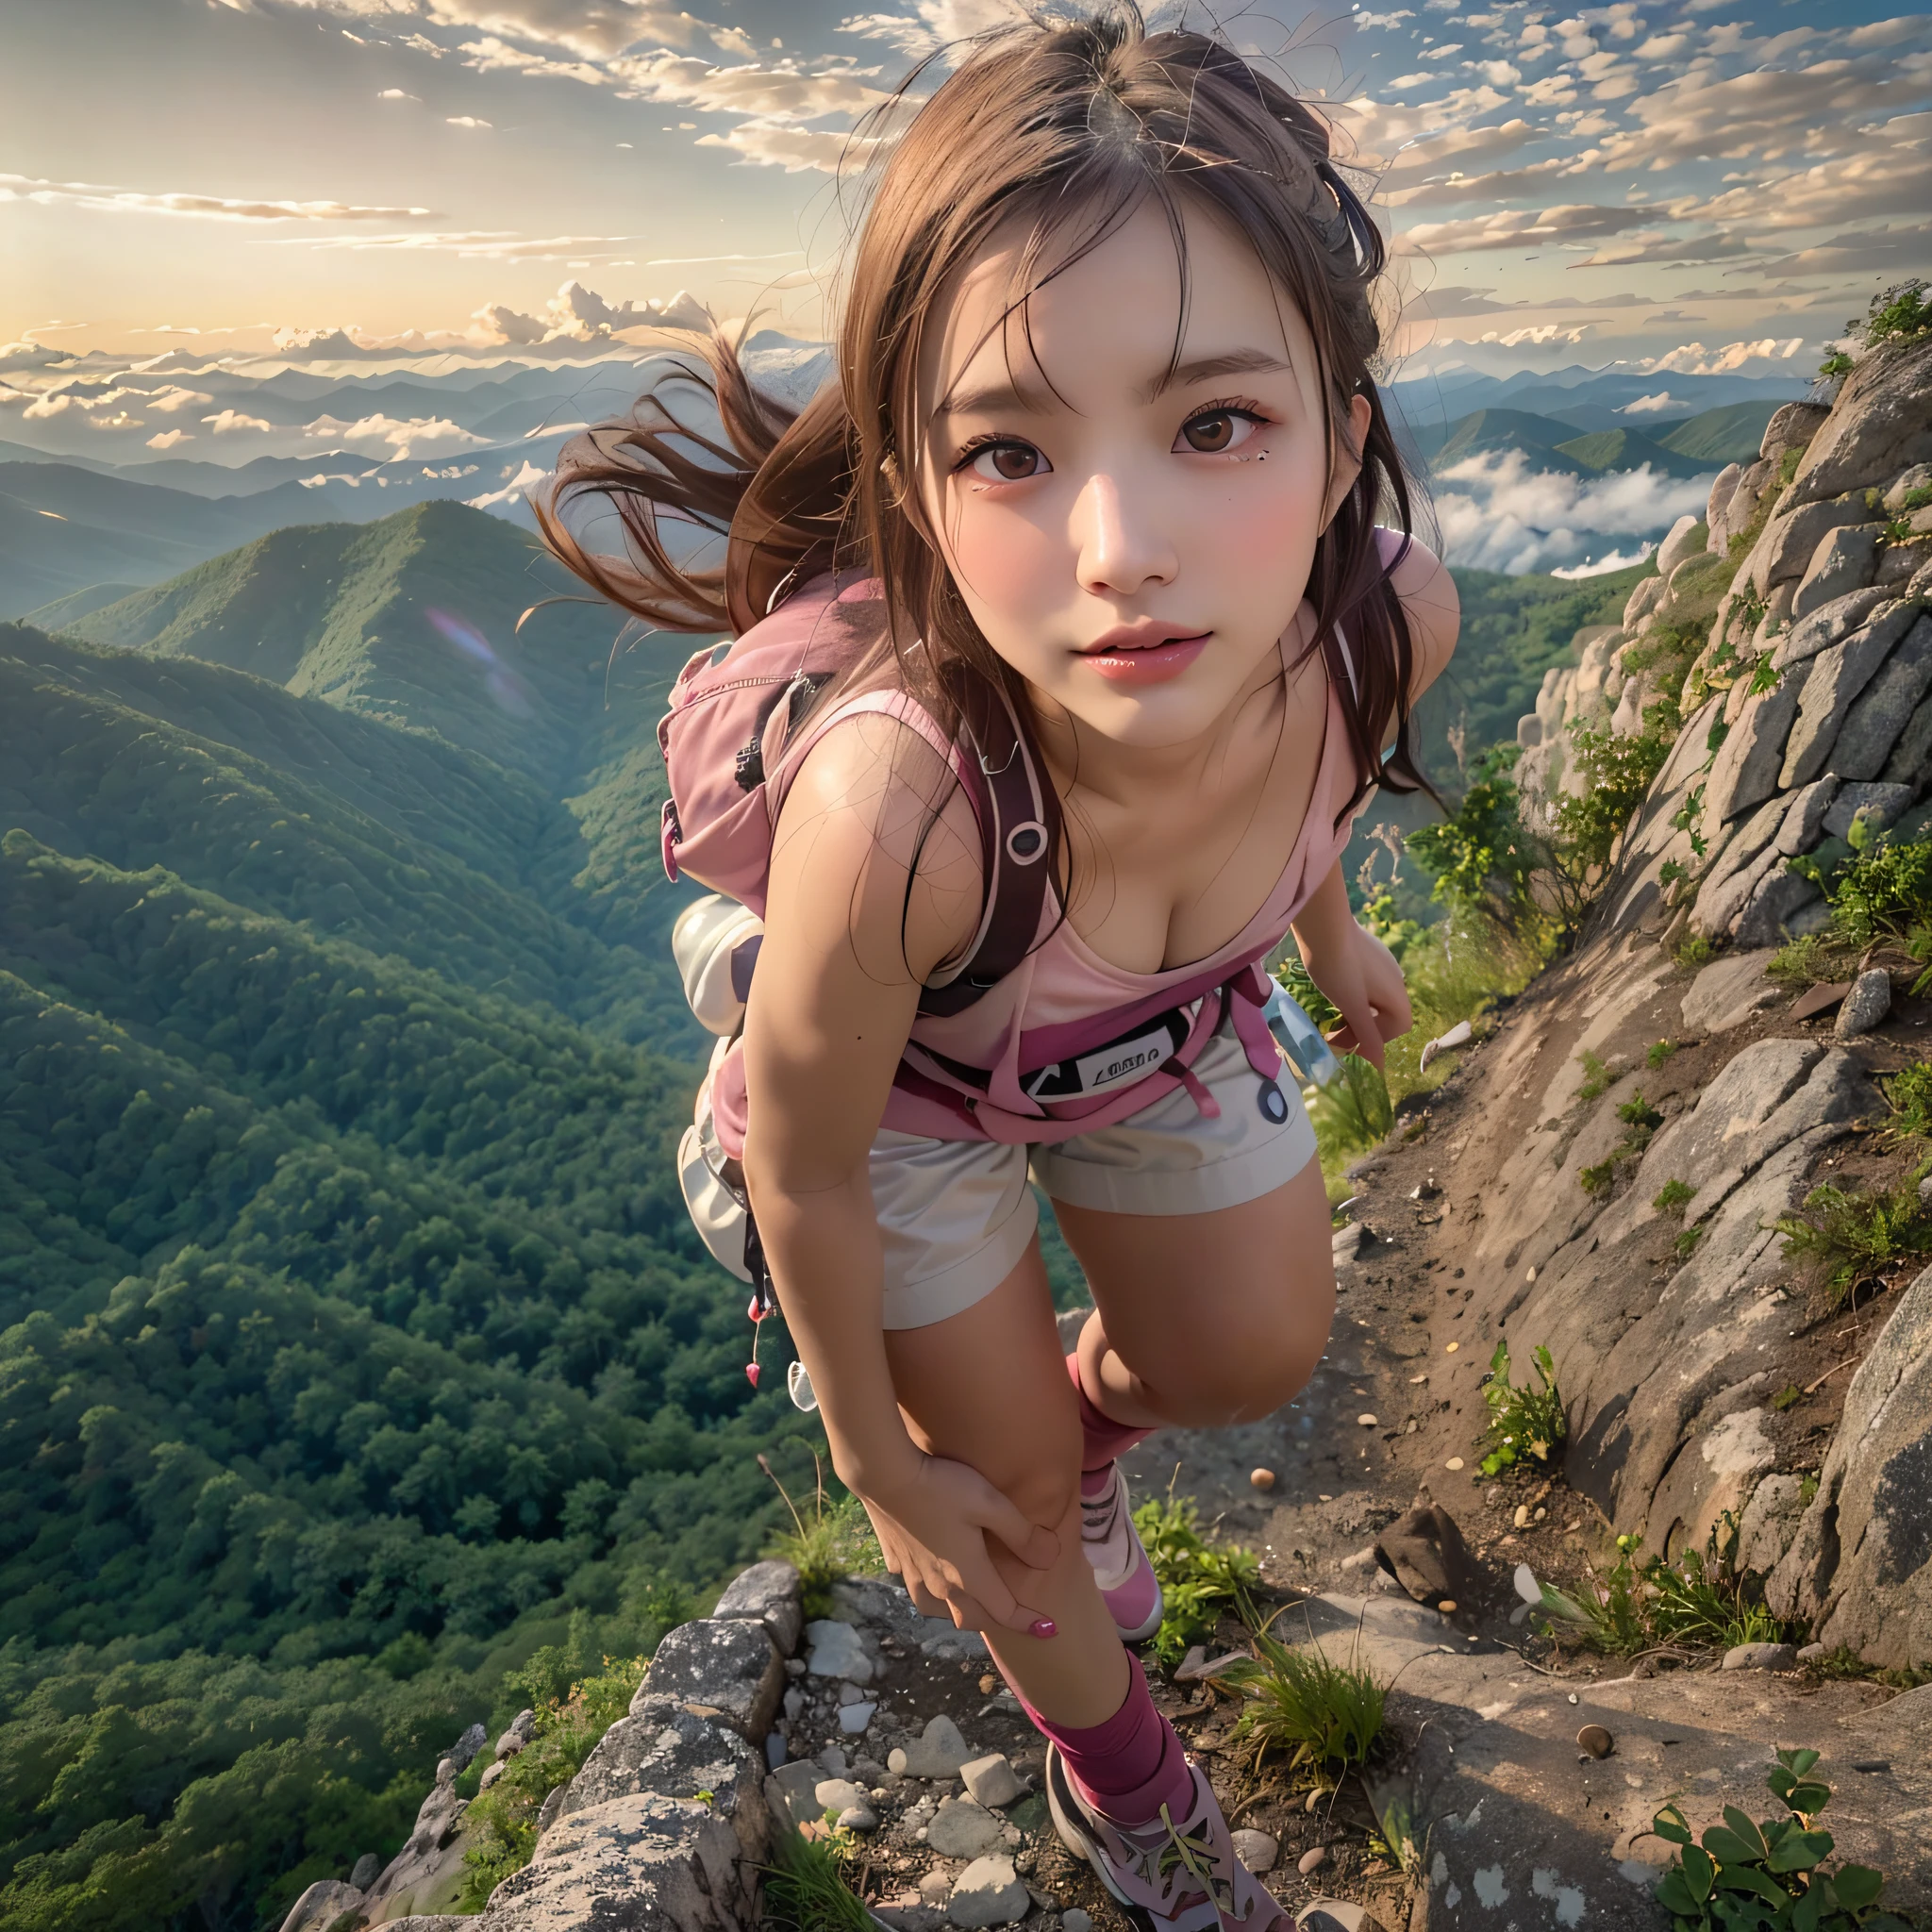 (Naturescape photography), (best quality), masterpiece:1.2, ultra high res, photorealistic:1.4, RAW photo, (Magnificent mountain, sea of clouds), (On a very high mountain peak), (sunset), (wideangle shot),  (Show cleavage:0.8),
(1girl), (Photo from the knee up:1.3), (18 years old), (smile:0.9), (shiny skin), (semi-long hair, dark brown hair), 
(Large white V-neck T-shirt, pink Trekking shorts), (Carrying a large backpack), 
(ultra detailed face), (ultra Beautiful fece), (ultra detailed eyes), (ultra detailed nose), (ultra detailed mouth), (ultra detailed arms), (ultra detailed body), pan focus, looking at the audience